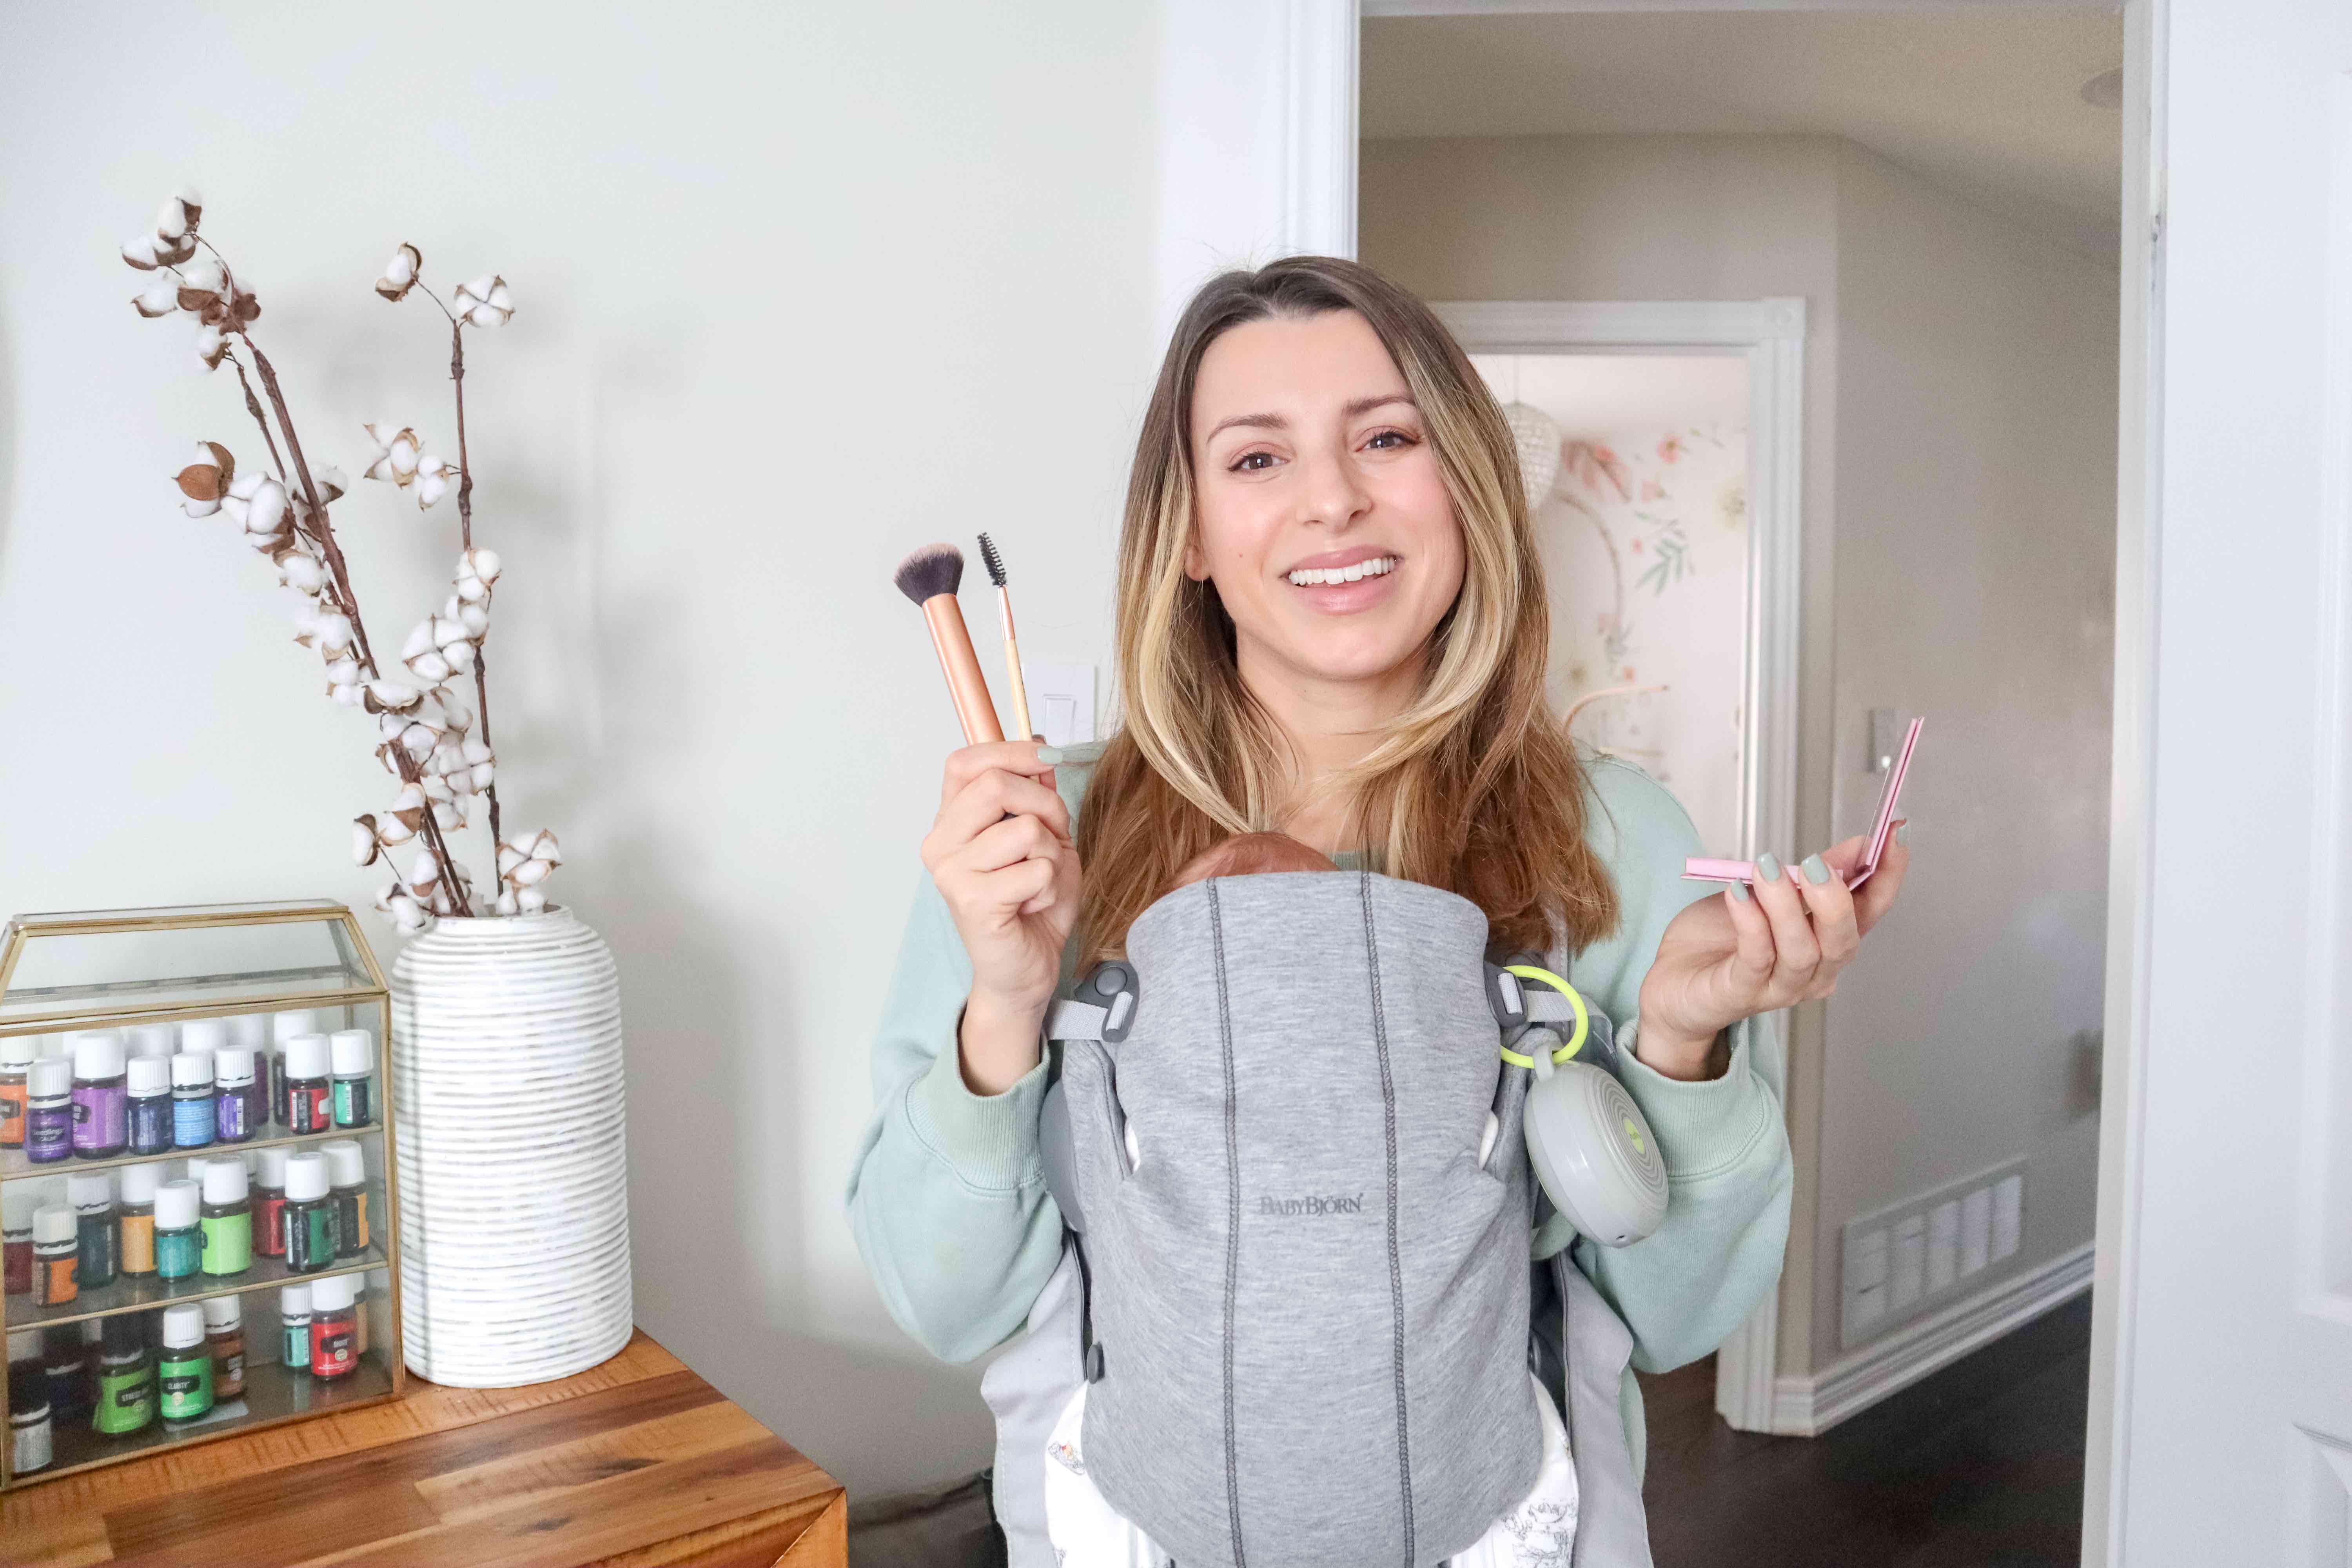 Quick & easy 5 minute natural makeup look with all natural products! This is my go-to makeup look to help me feel a little more put together and ready to take on the day!